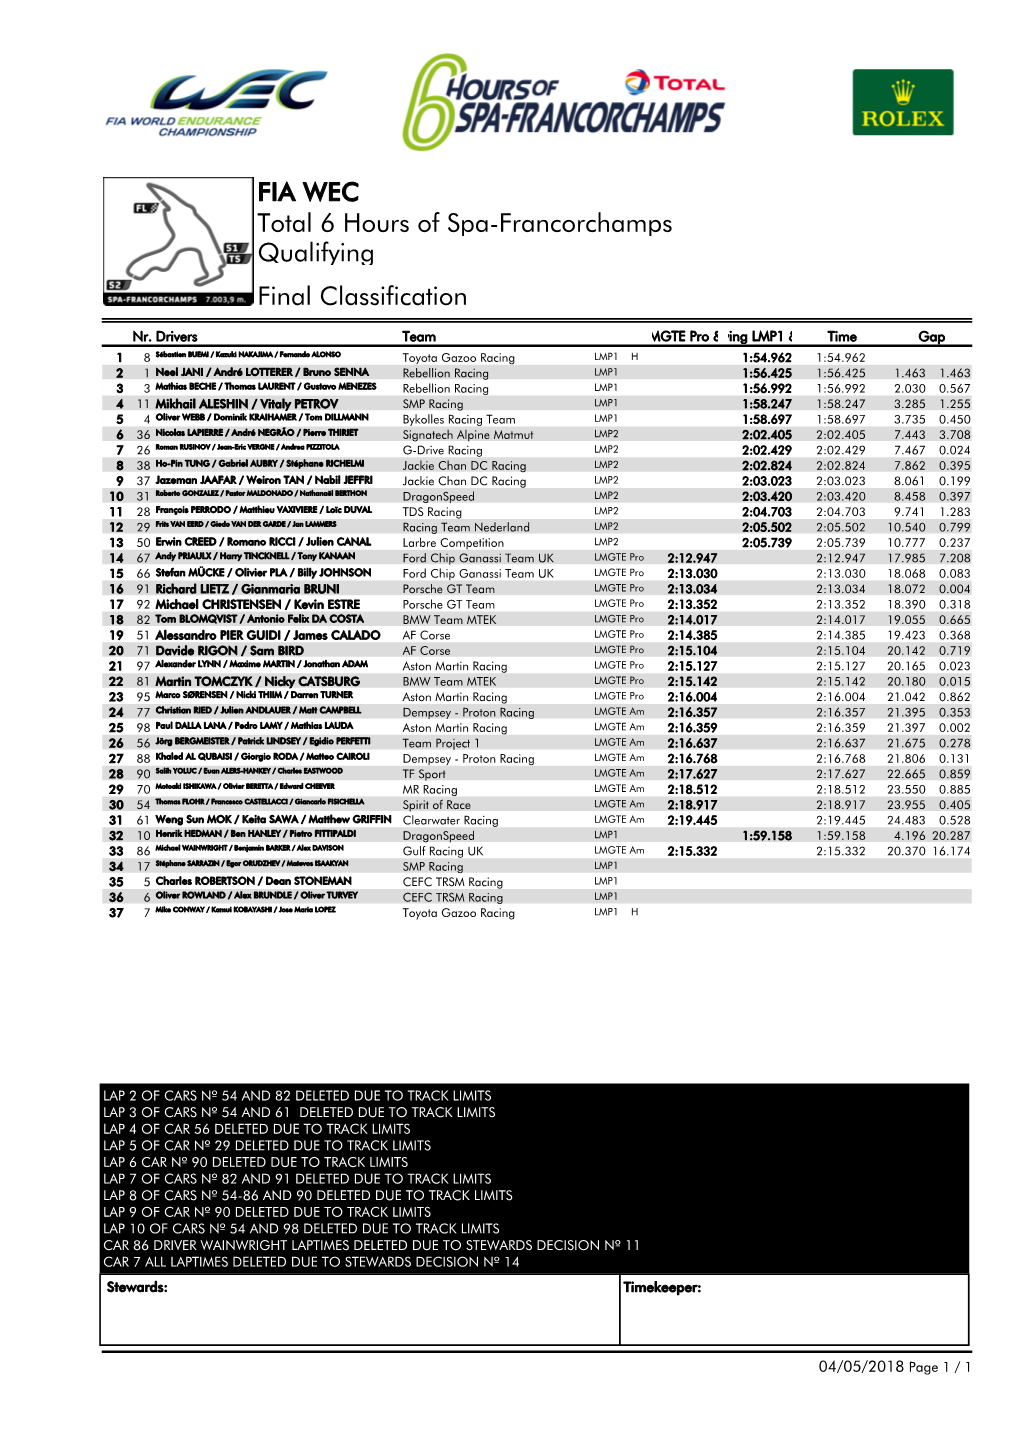 FIA WEC Total 6 Hours of Spa-Francorchamps Qualifying Final Classification